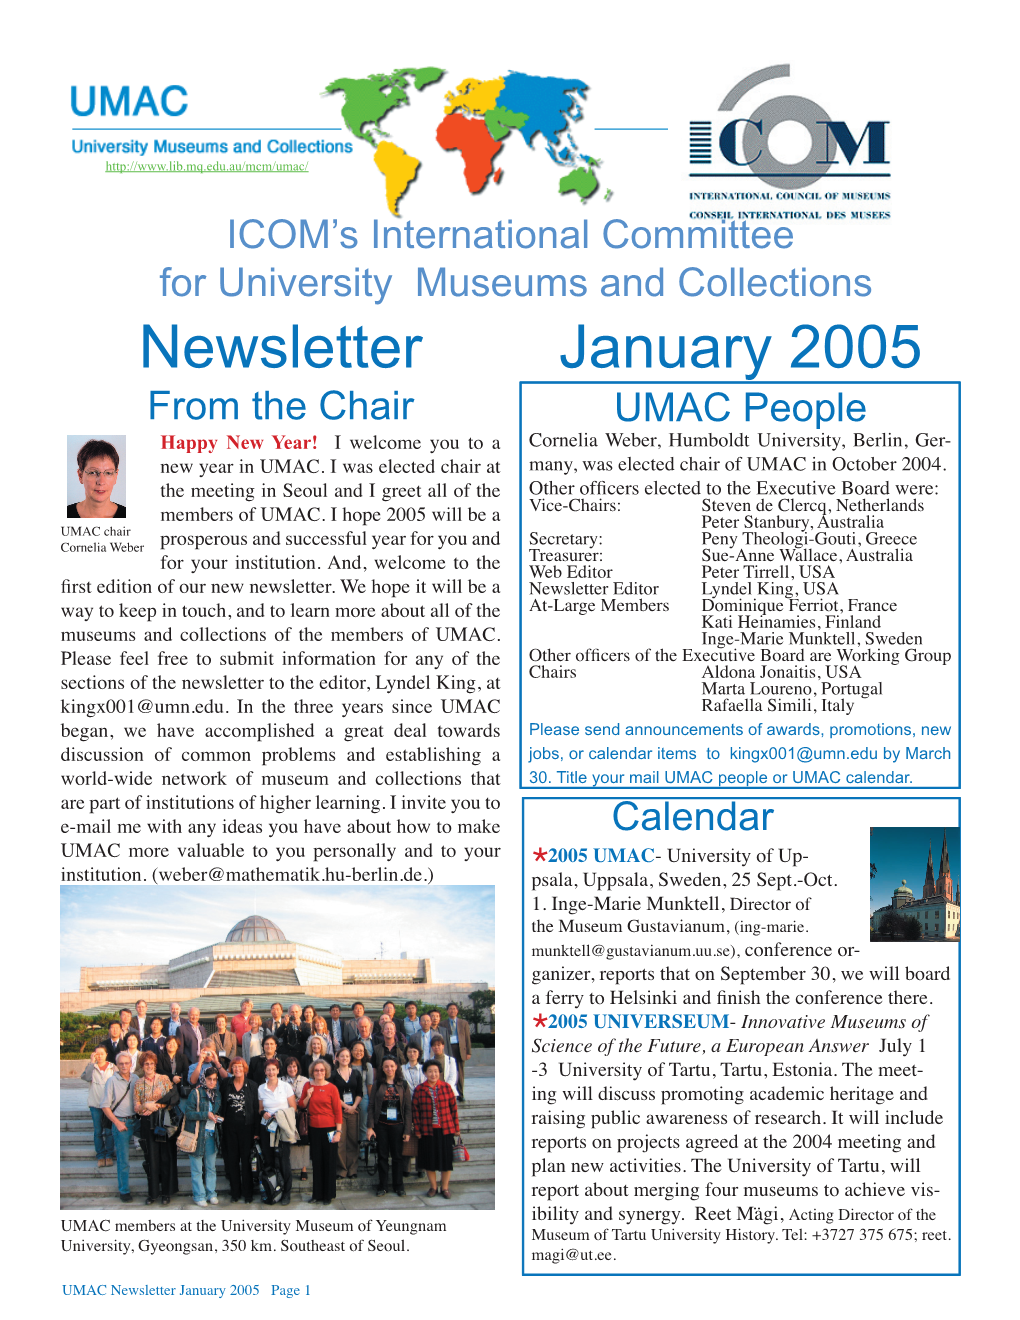 Newsletter January 2005 from the Chair UMAC People Happy New Year! I Welcome You to a Cornelia Weber, Humboldt University, Berlin, Ger- New Year in UMAC